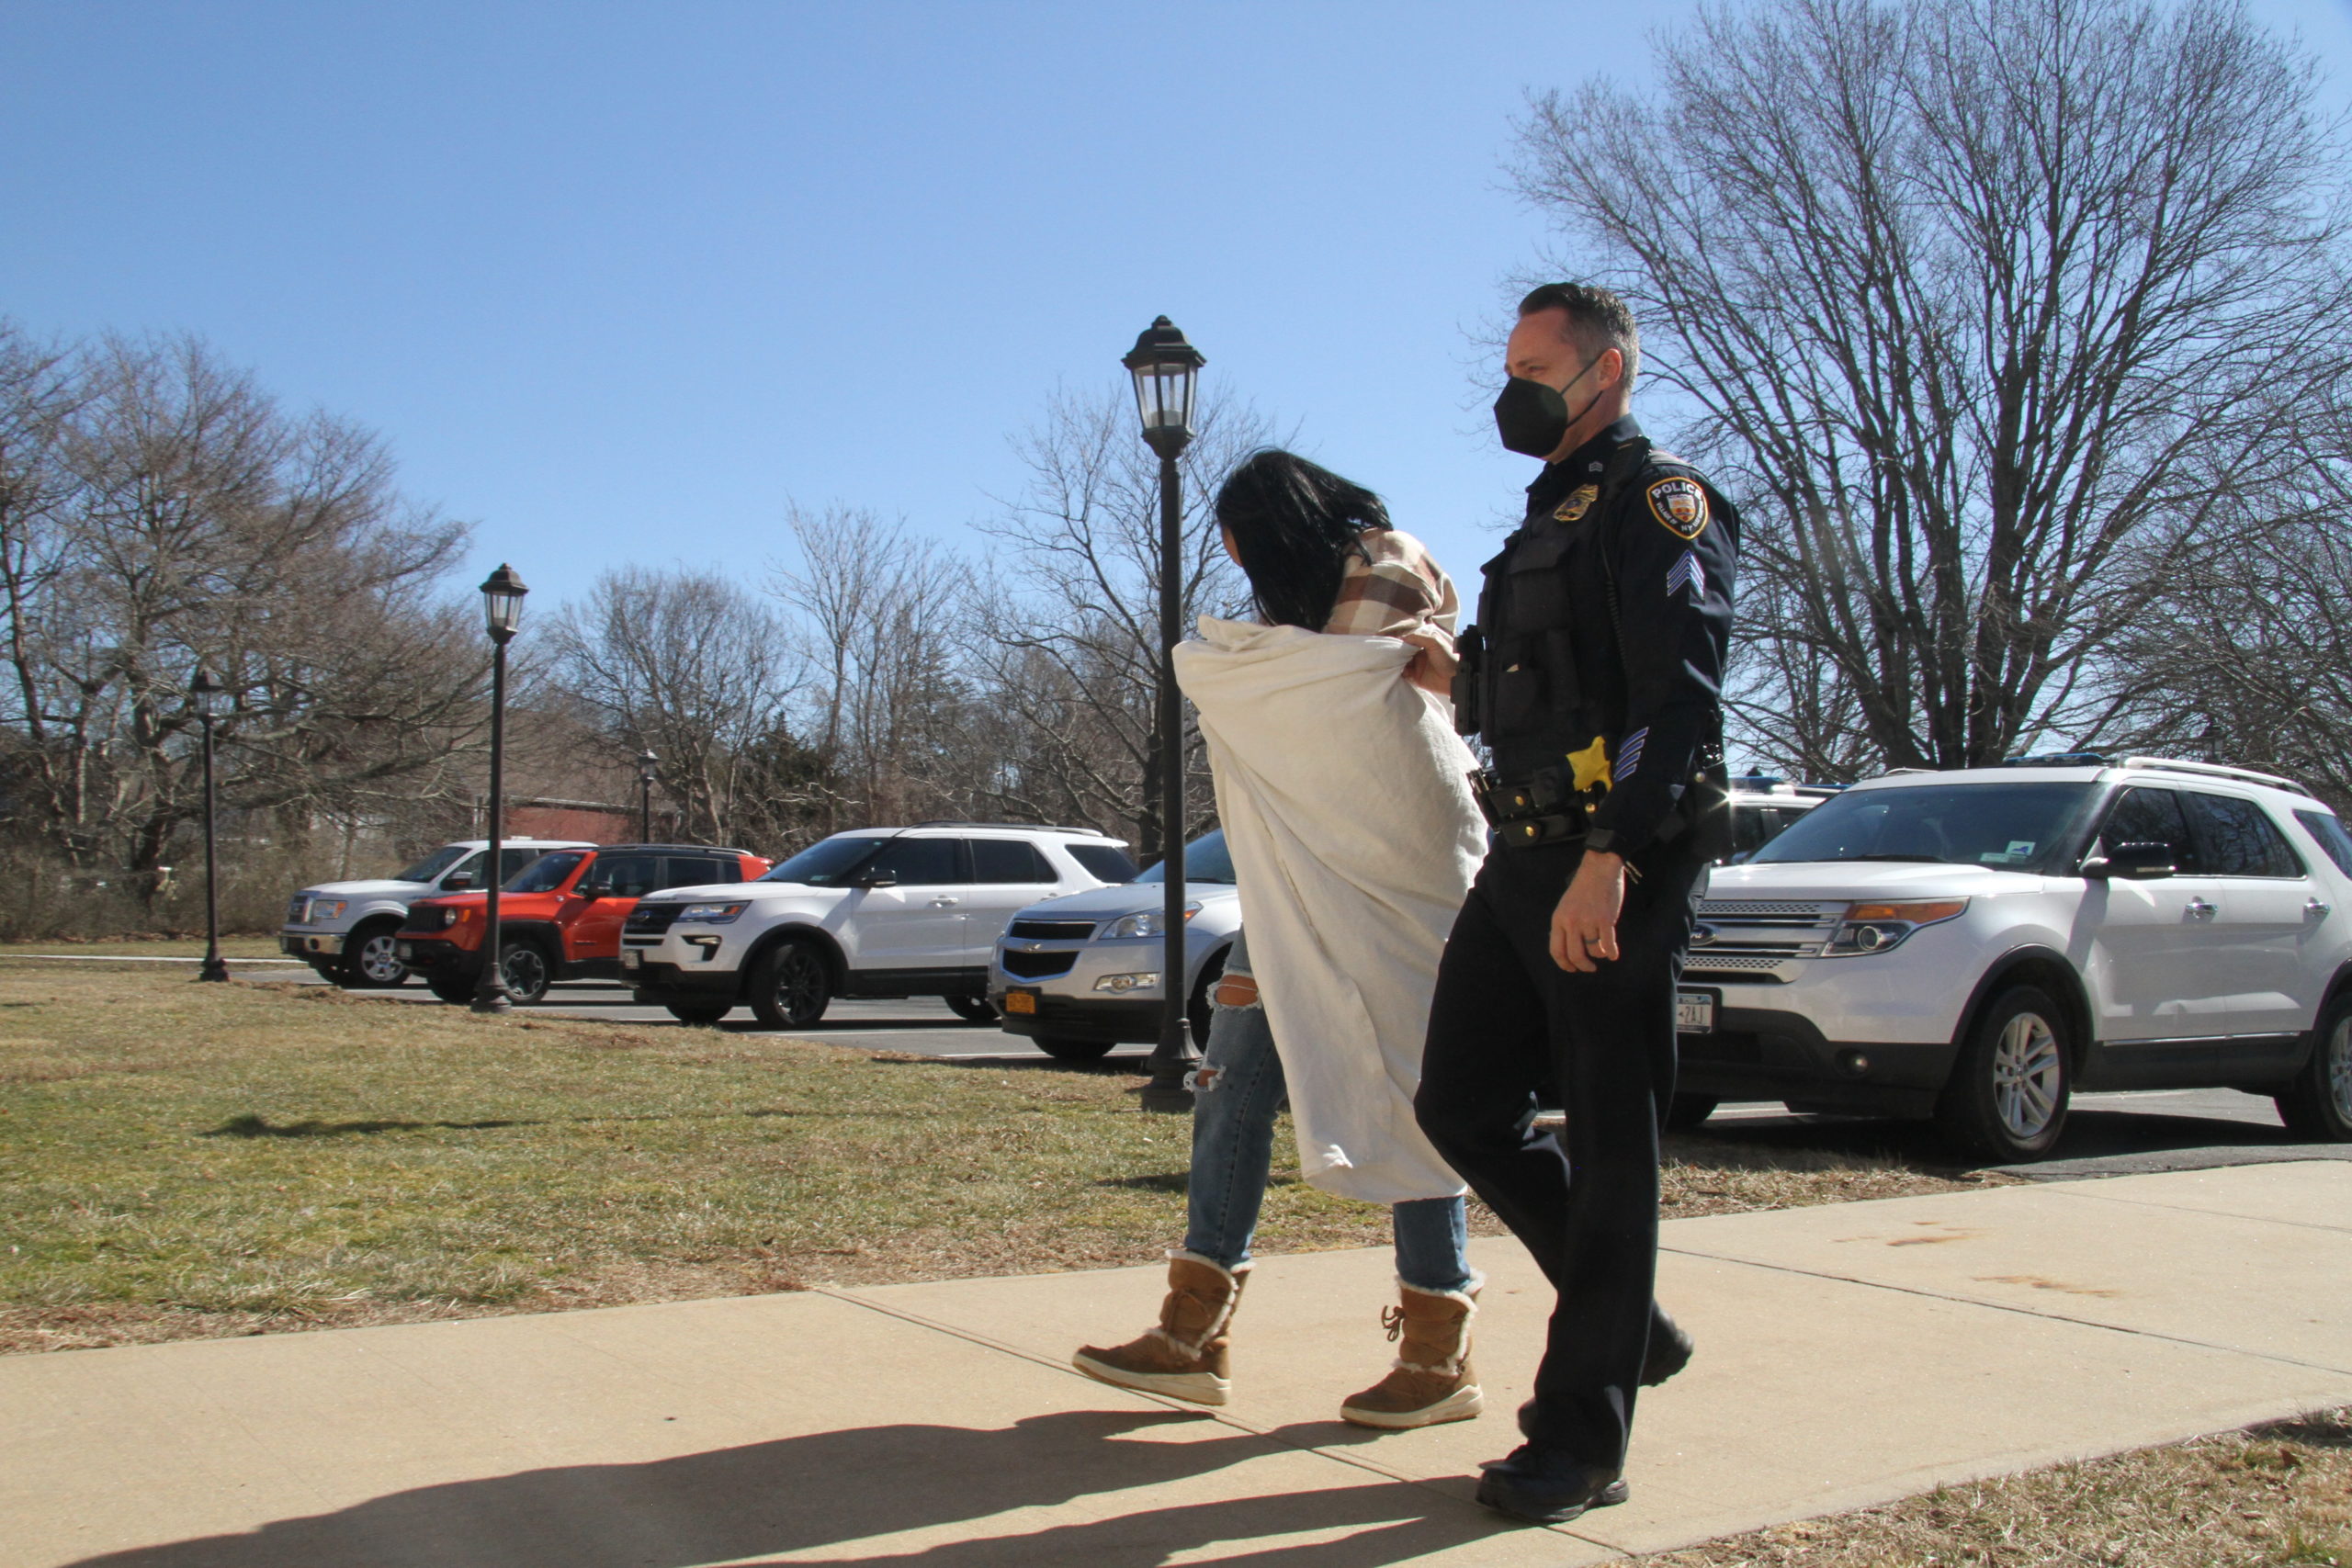 Four of the five suspects in the Balenciaga theft were arraigned in East Hampton Town Justice Court on Friday. The fifth subject, a female, escaped after the car the five were riding in suffered a flat tire near Manorville.